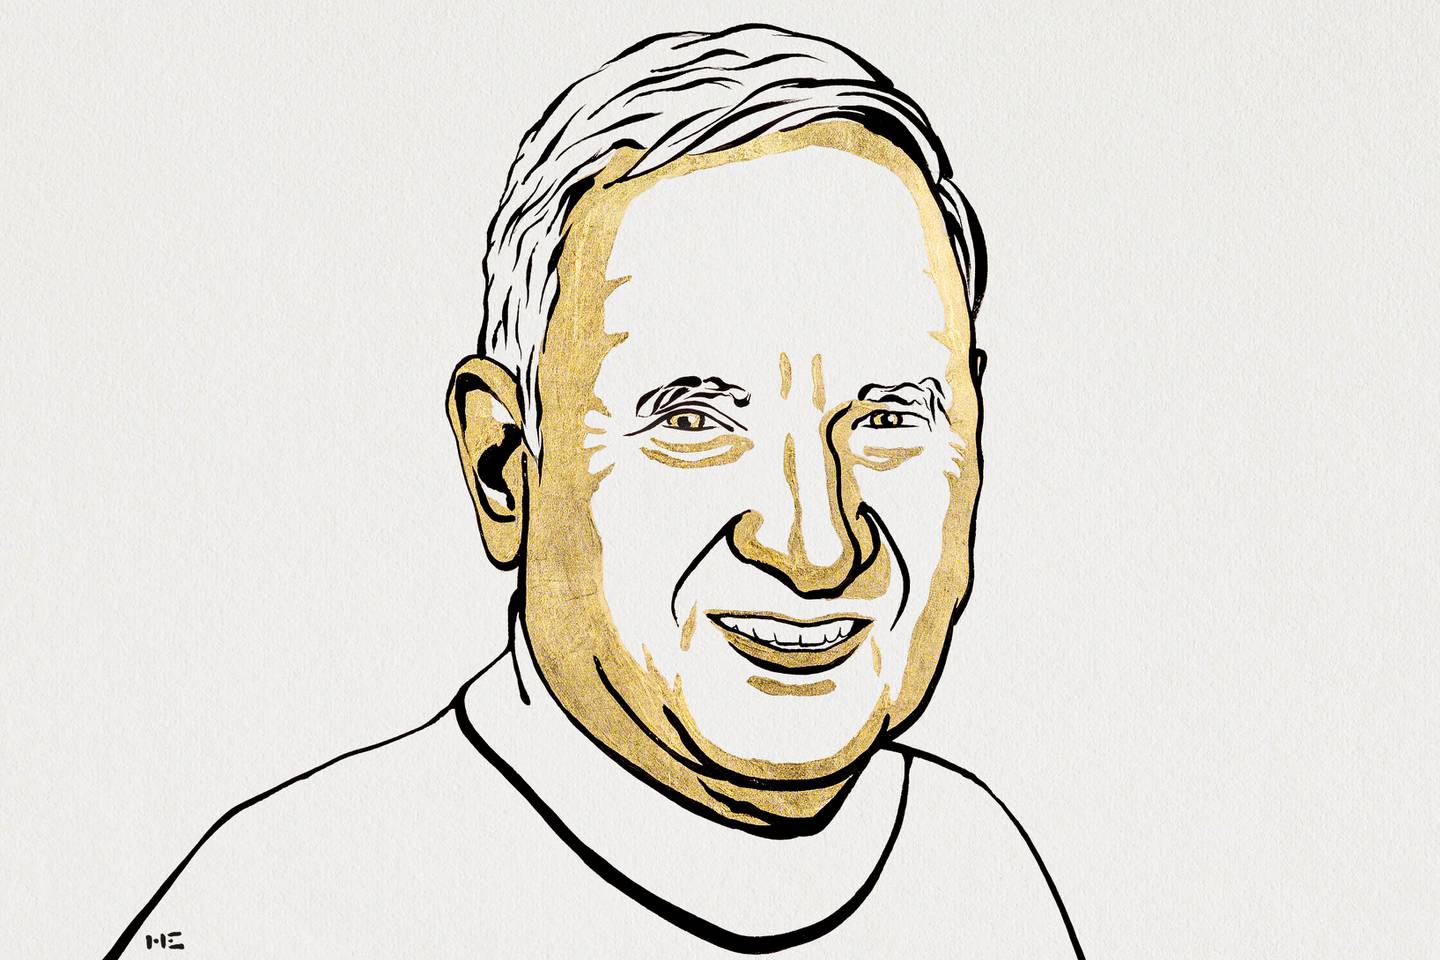 An illustration of John Clauser, one of the Nobel Prize in Physics winners for 2022. The illustration in black and gold on a white background shows a smiling white man with a crew neck shirt.